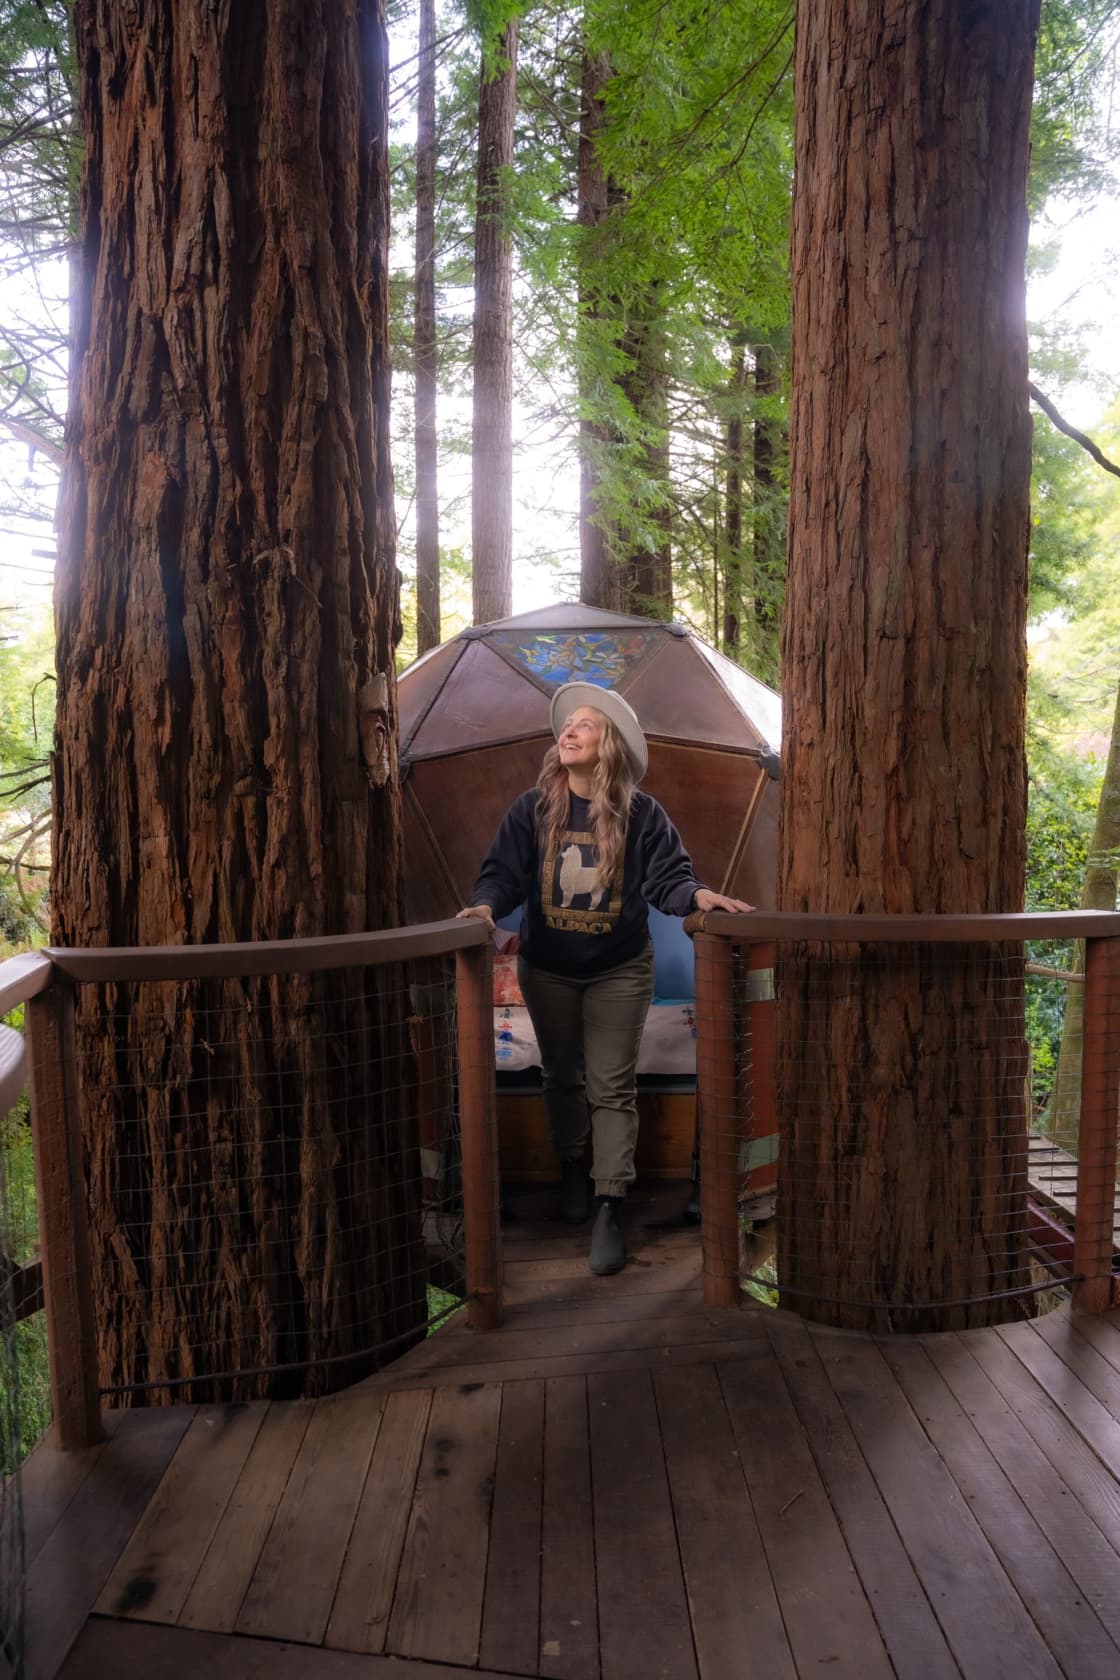 Nestled perfectly between two redwoods, the dome is made of recycled materials!